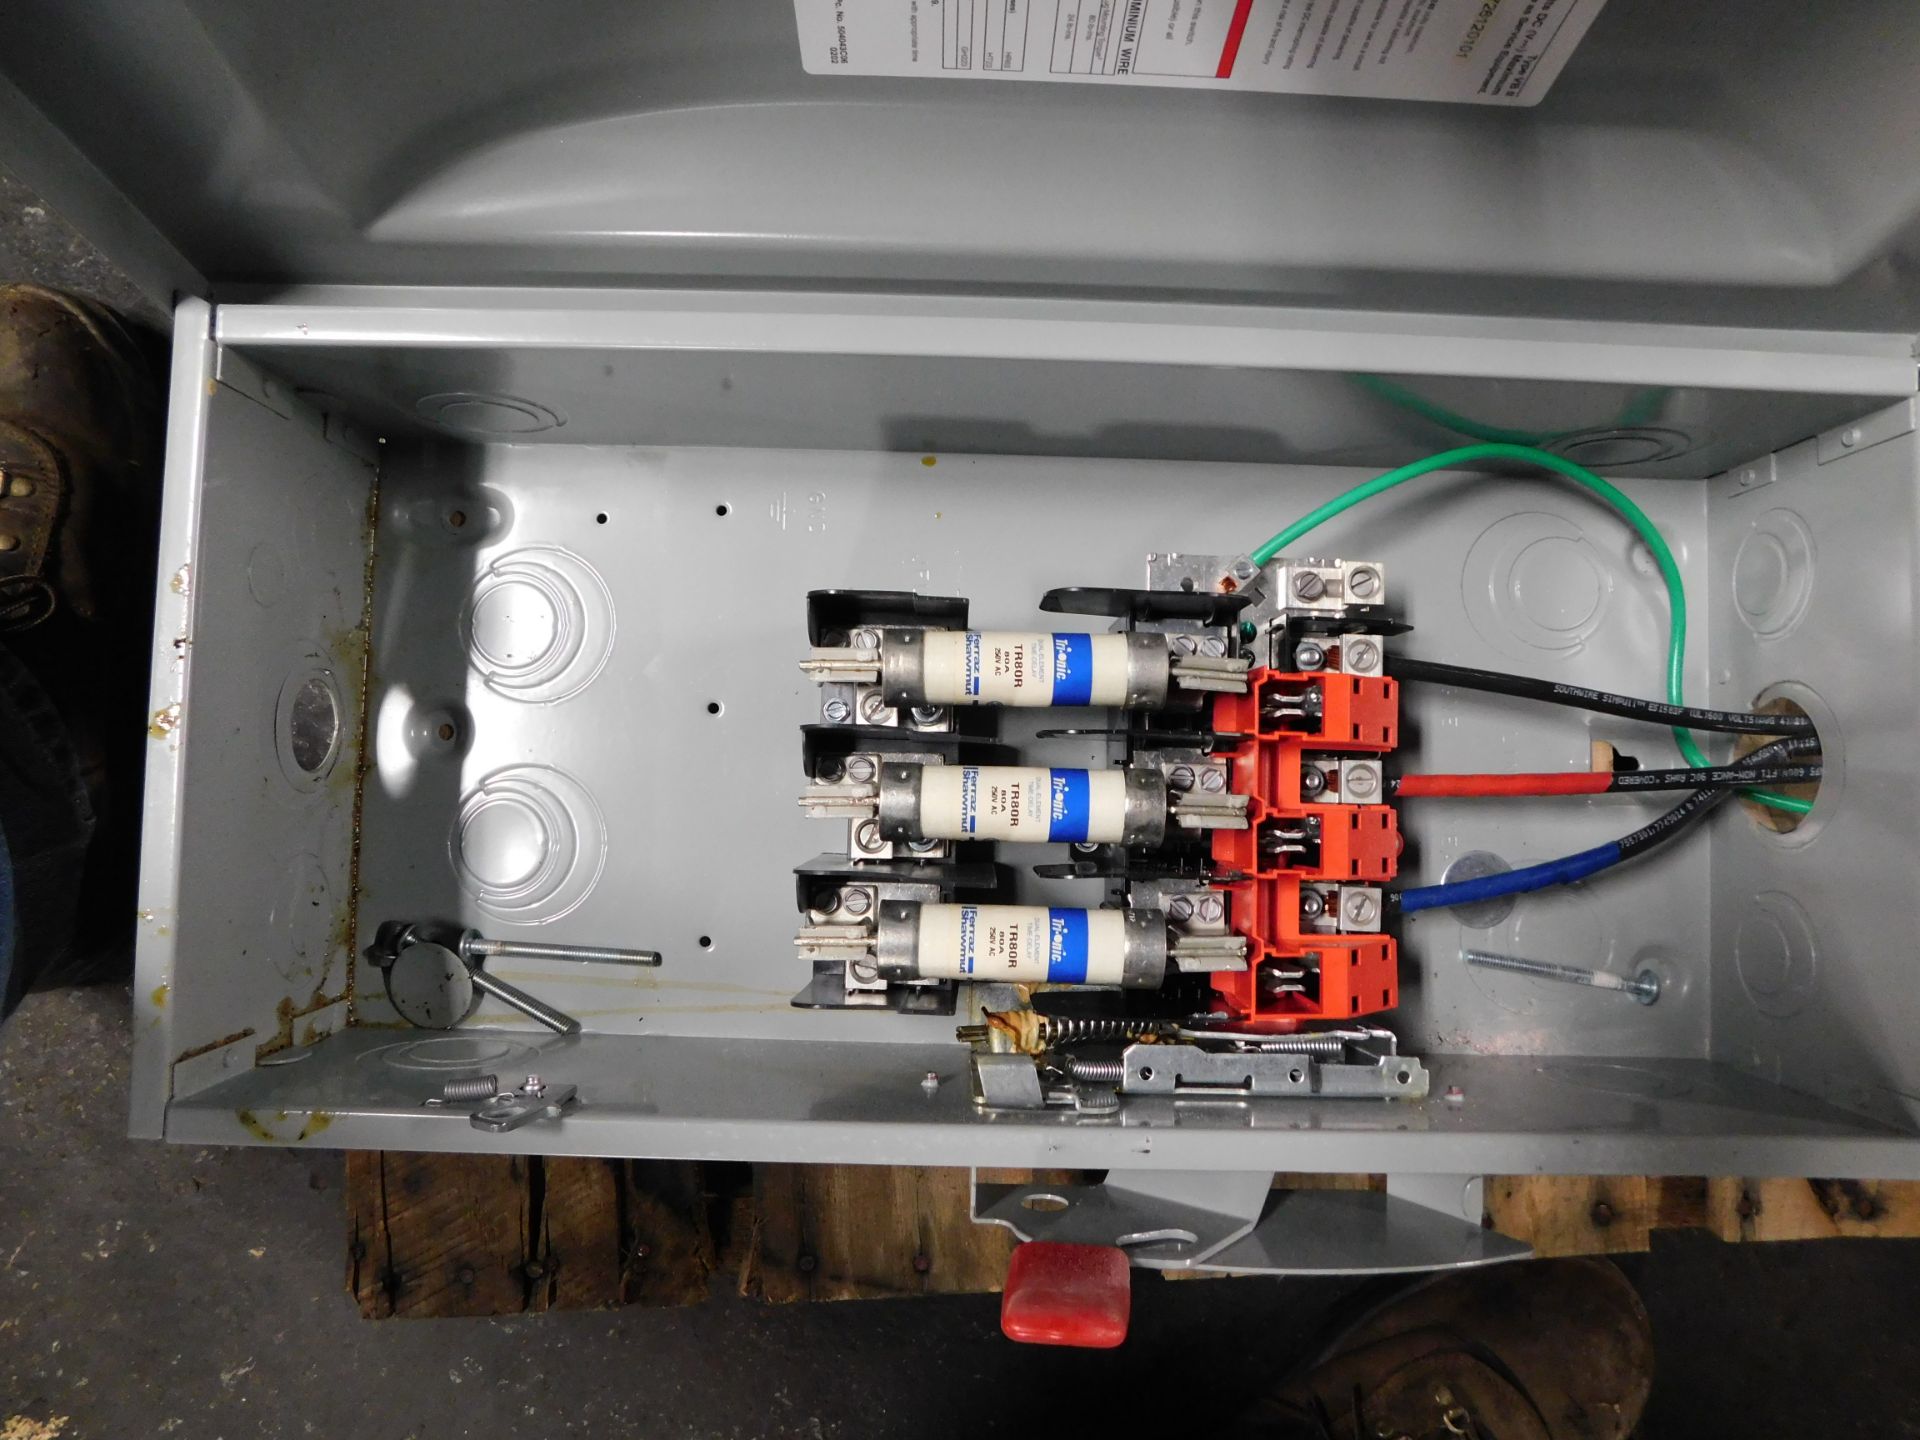 LOT OF (5) GE AND SIEMENS DISCONNECT SWITCHES. - Image 11 of 11